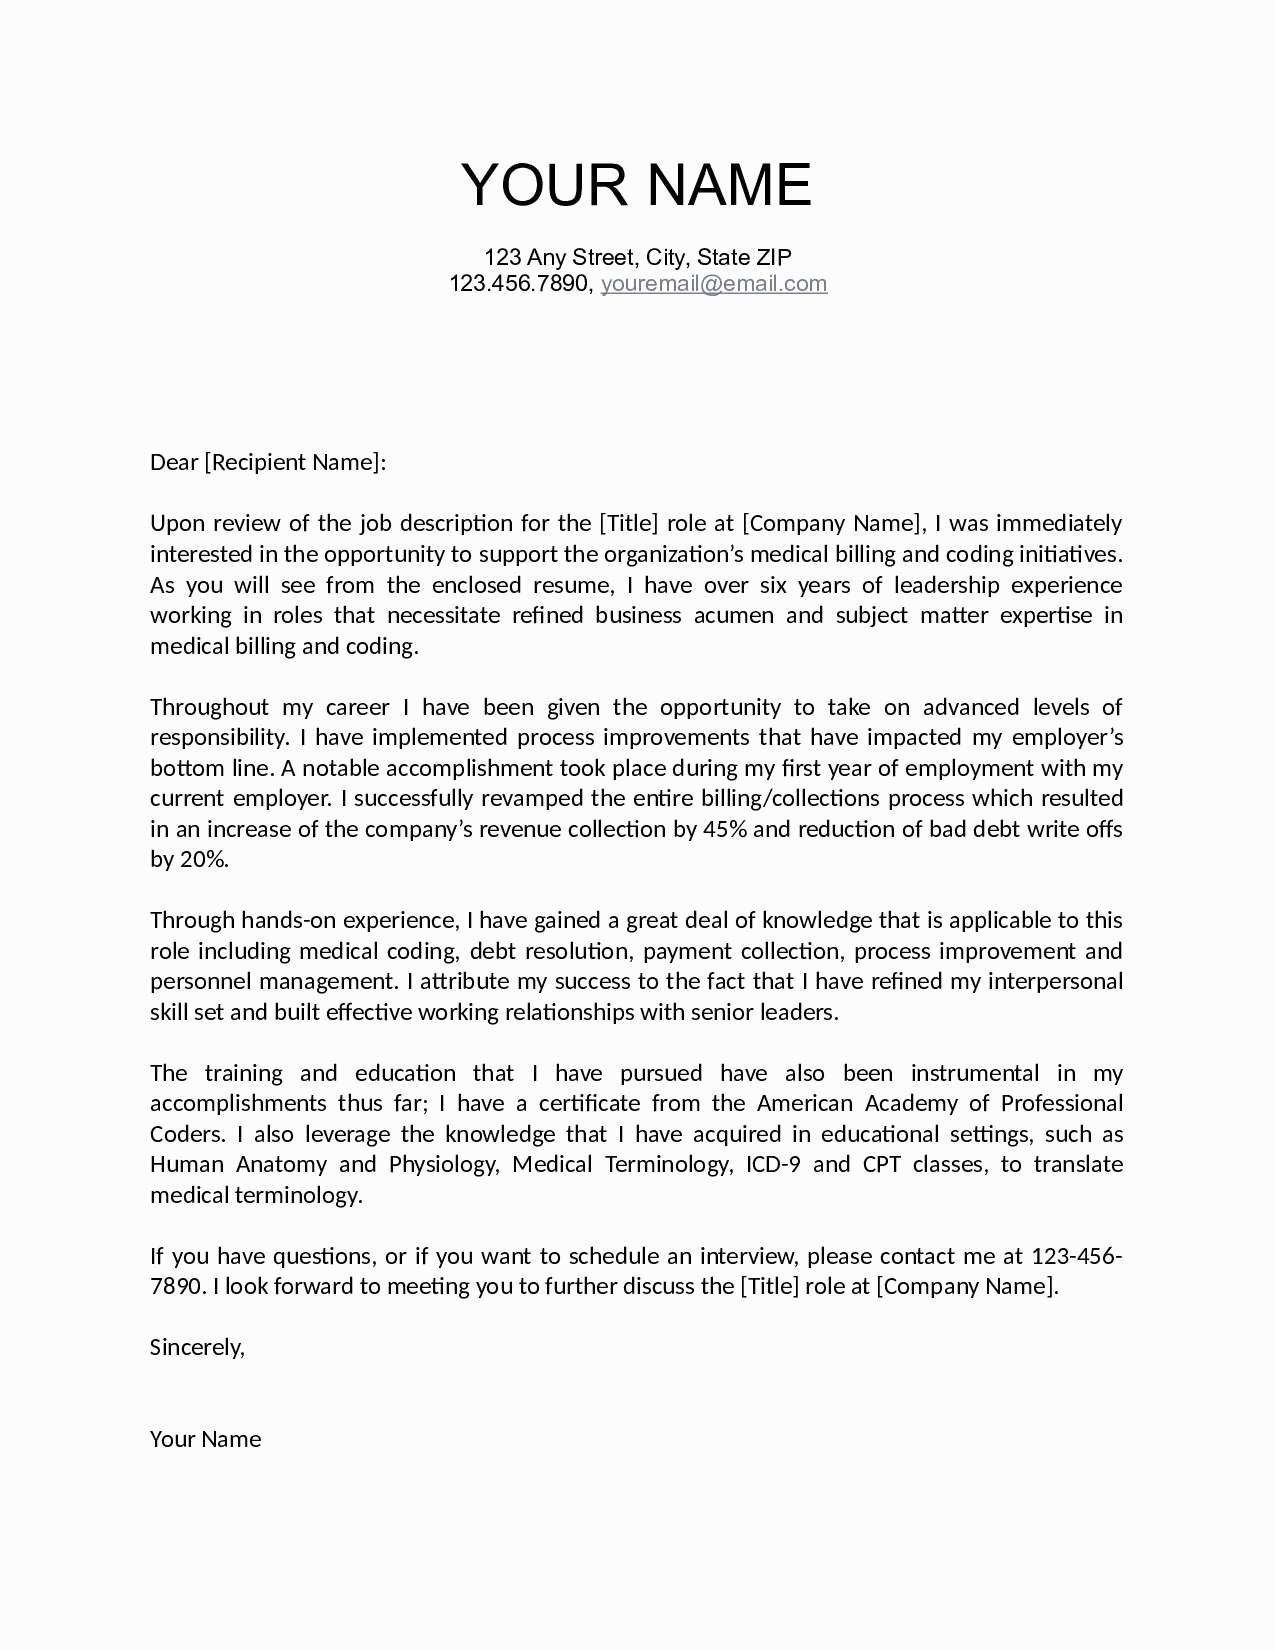 Email Letter Of Recommendation Template - Best Re Mendation Letter Template for Job